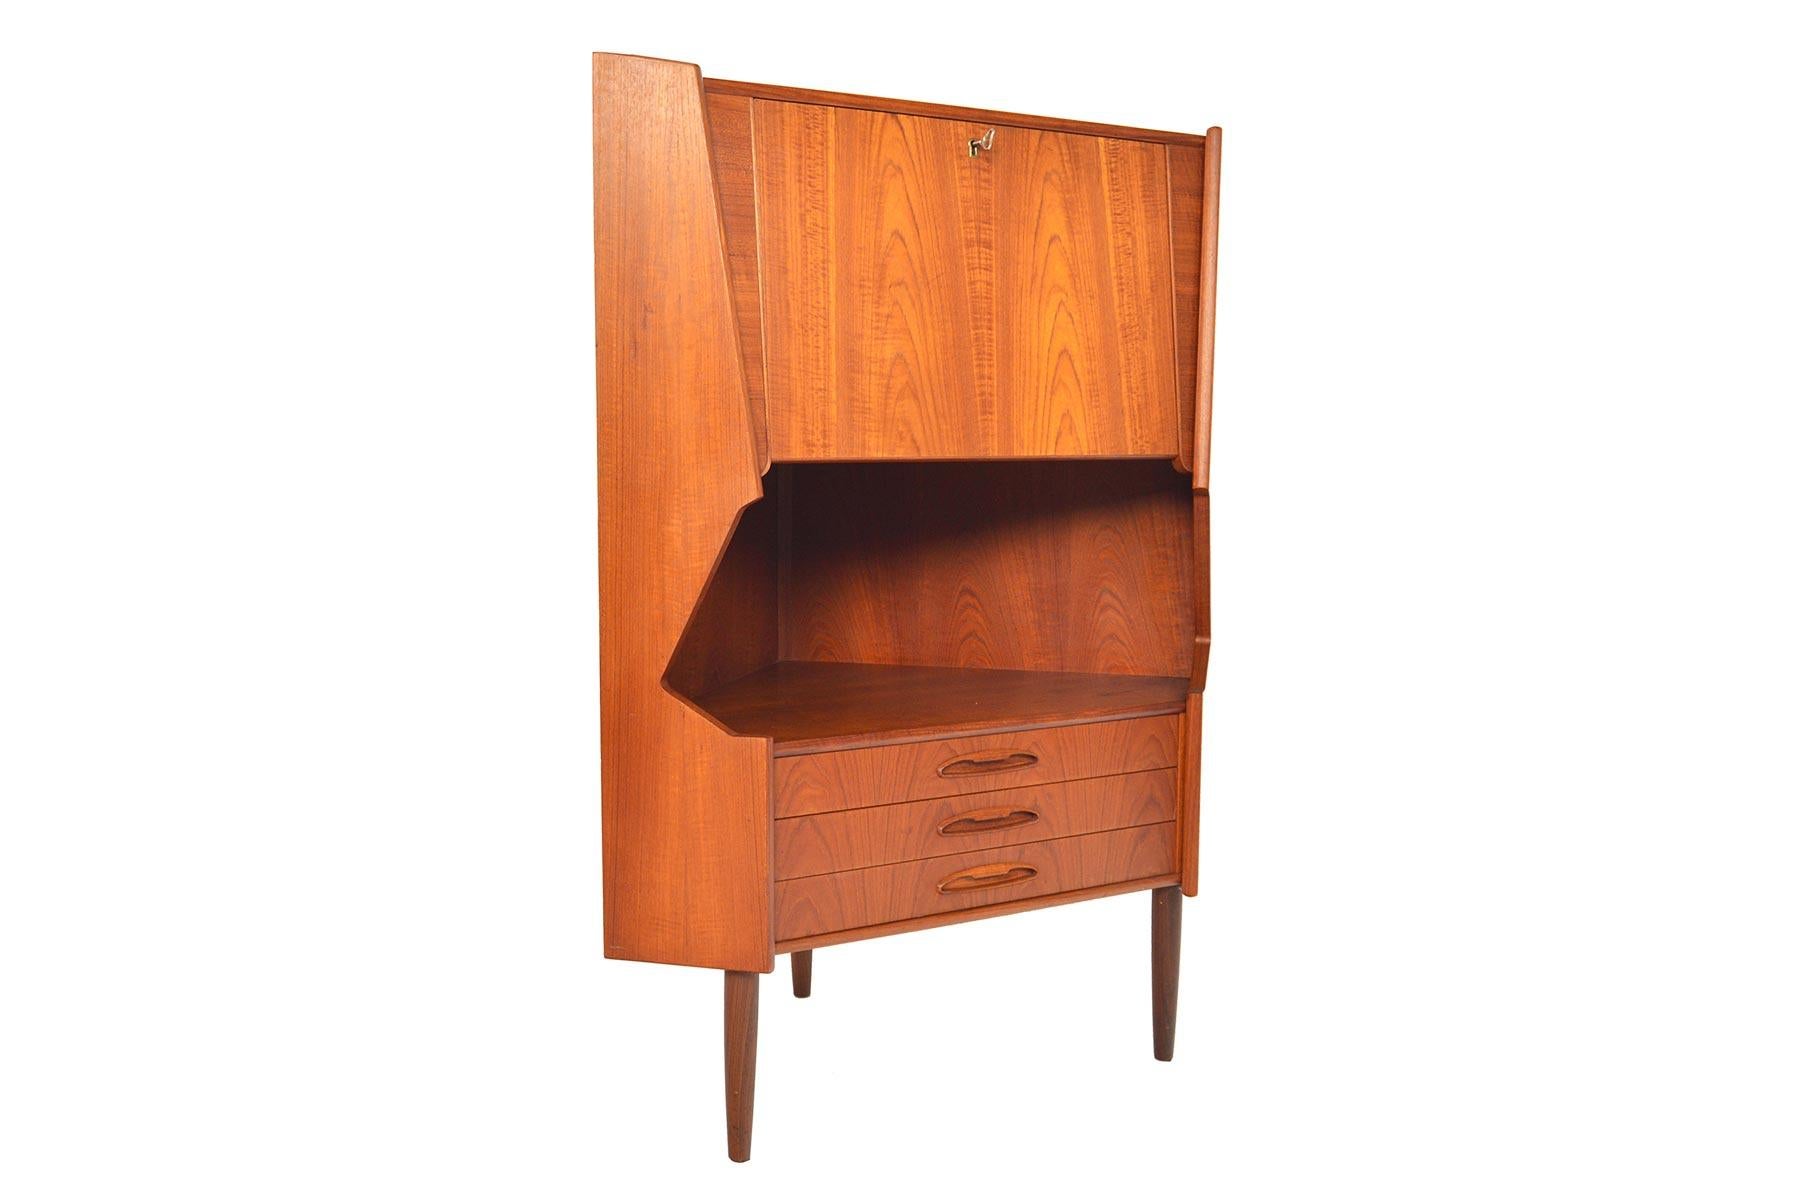 This Danish modern midcentury corner unit offers stunning bar storage. The top compartment is actuated by a key and reveals an etched mirror interior with fixed shelf. A lower cubby is perfect for bottle storage and three small drawers provide